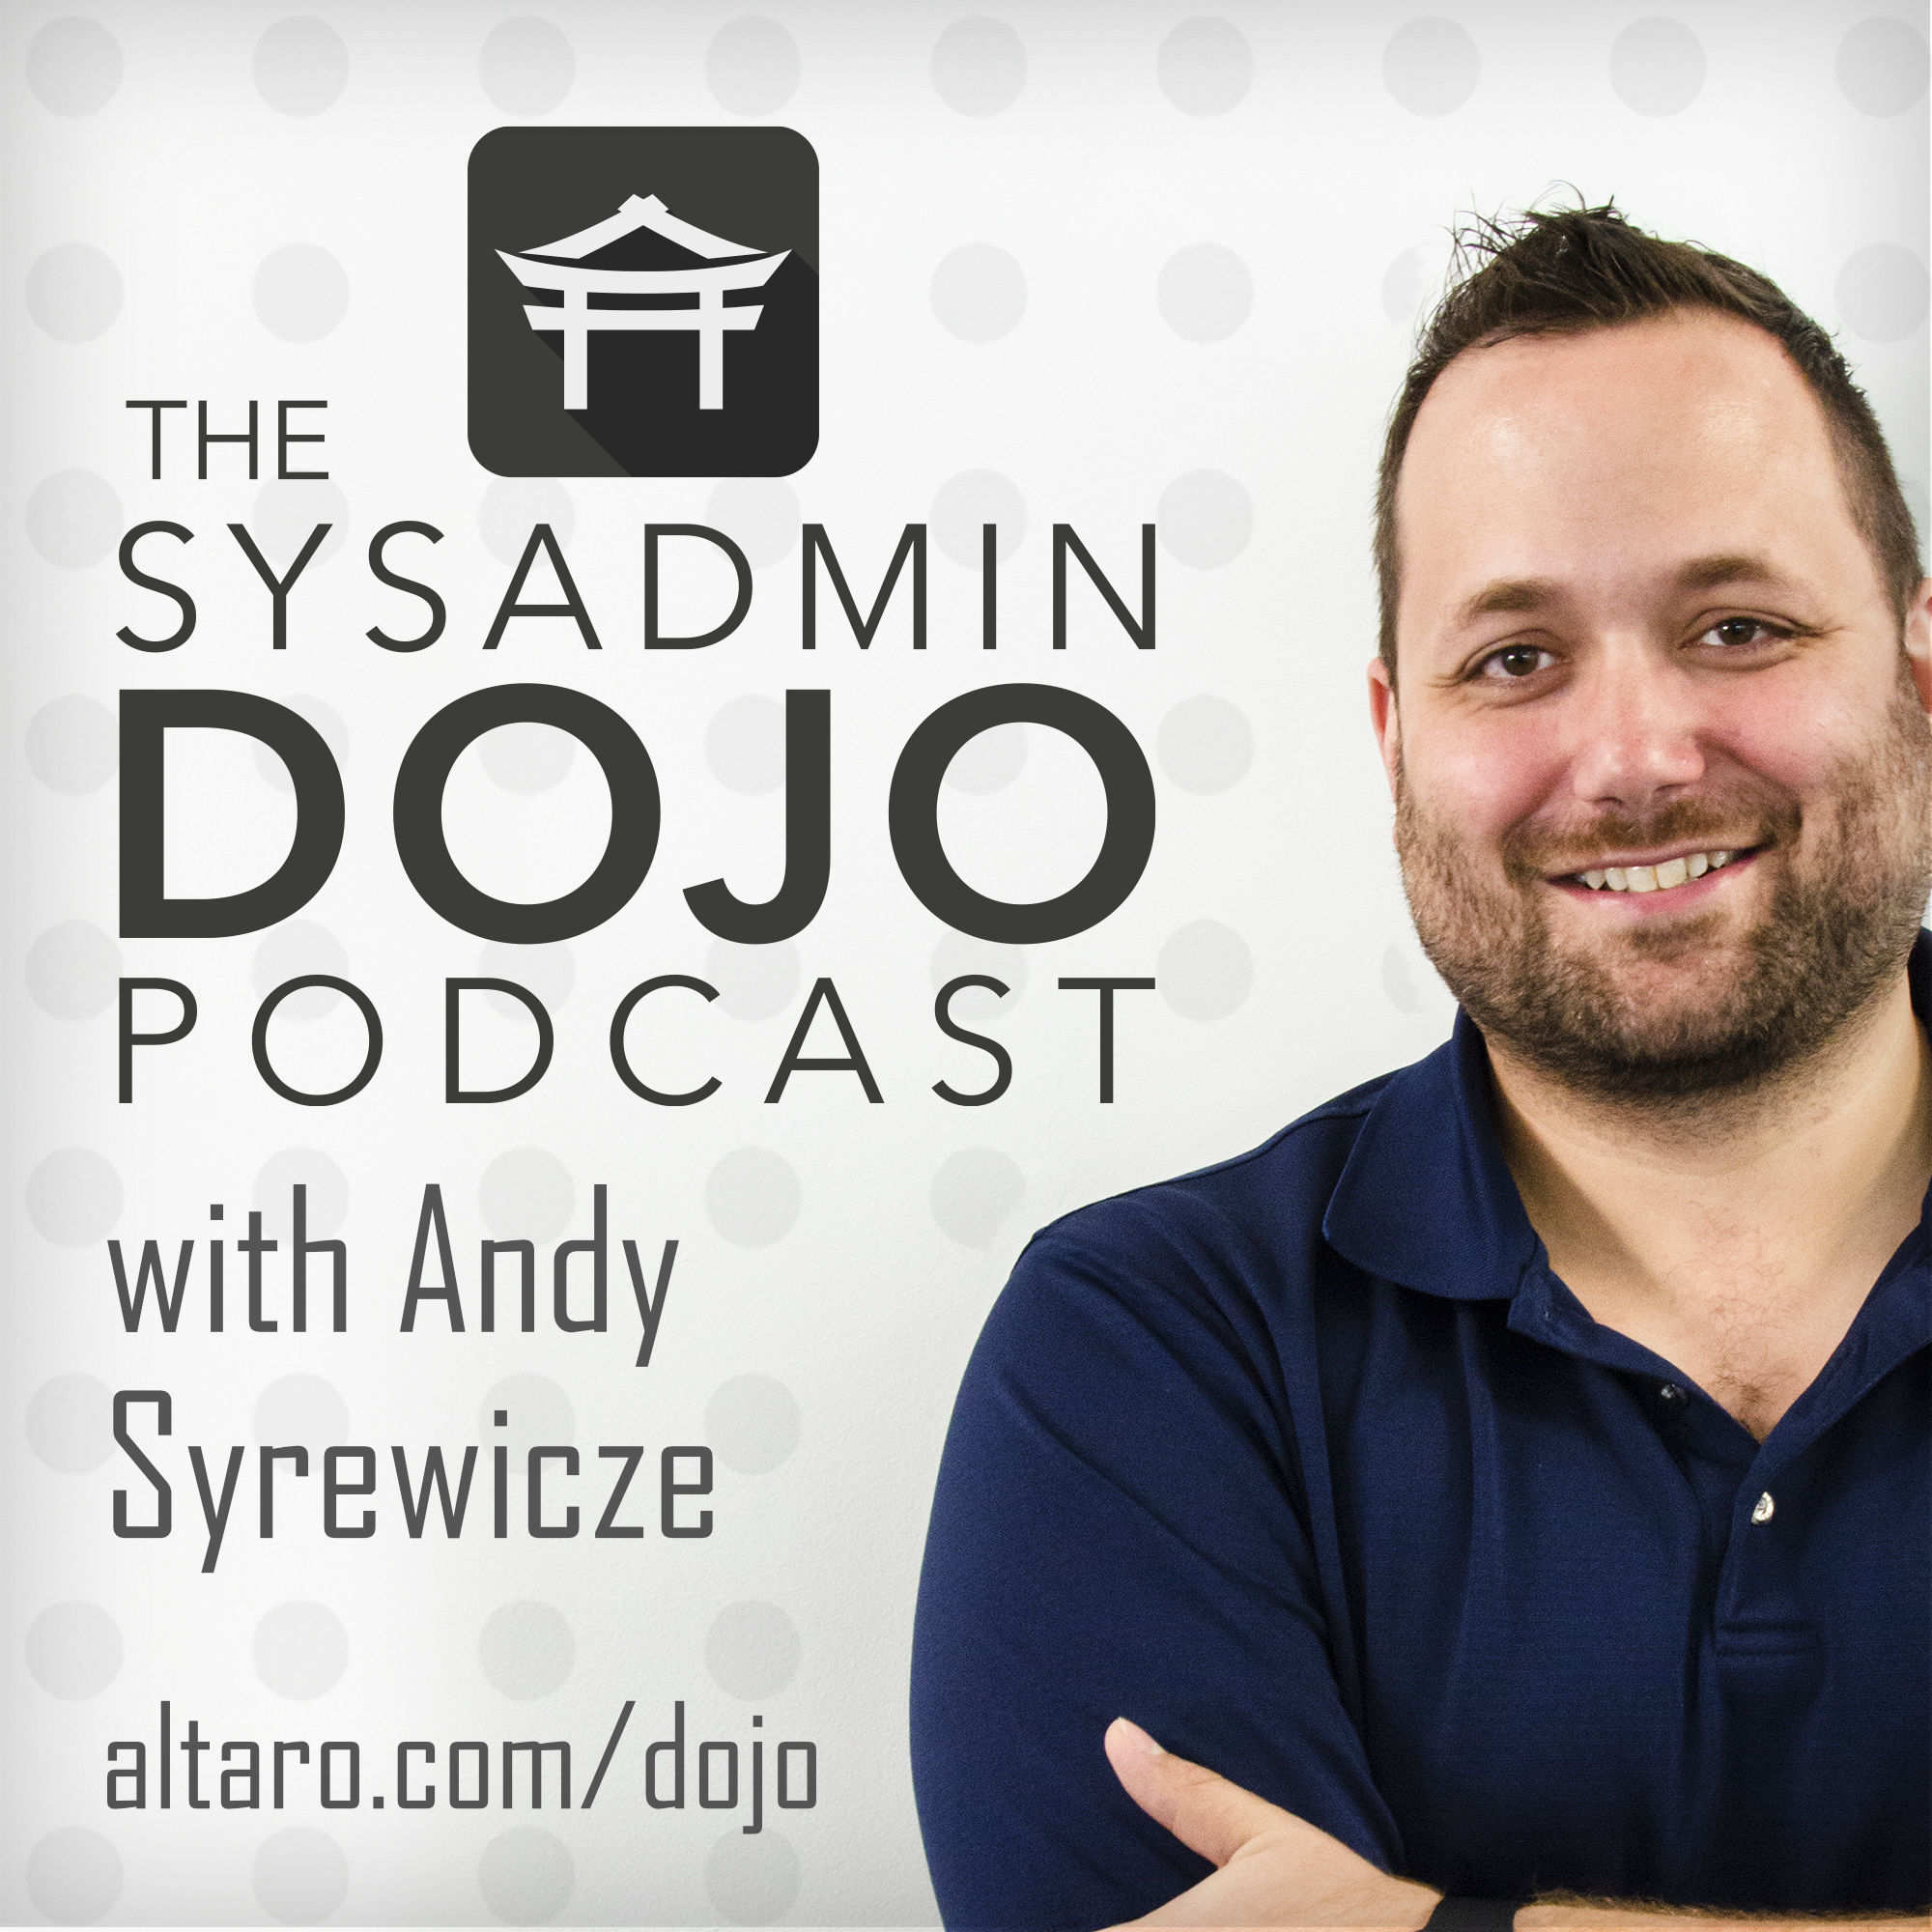 Connecting Clouds - Azure Networking with Mike Bender | The SysAdmin DOJO Podcast